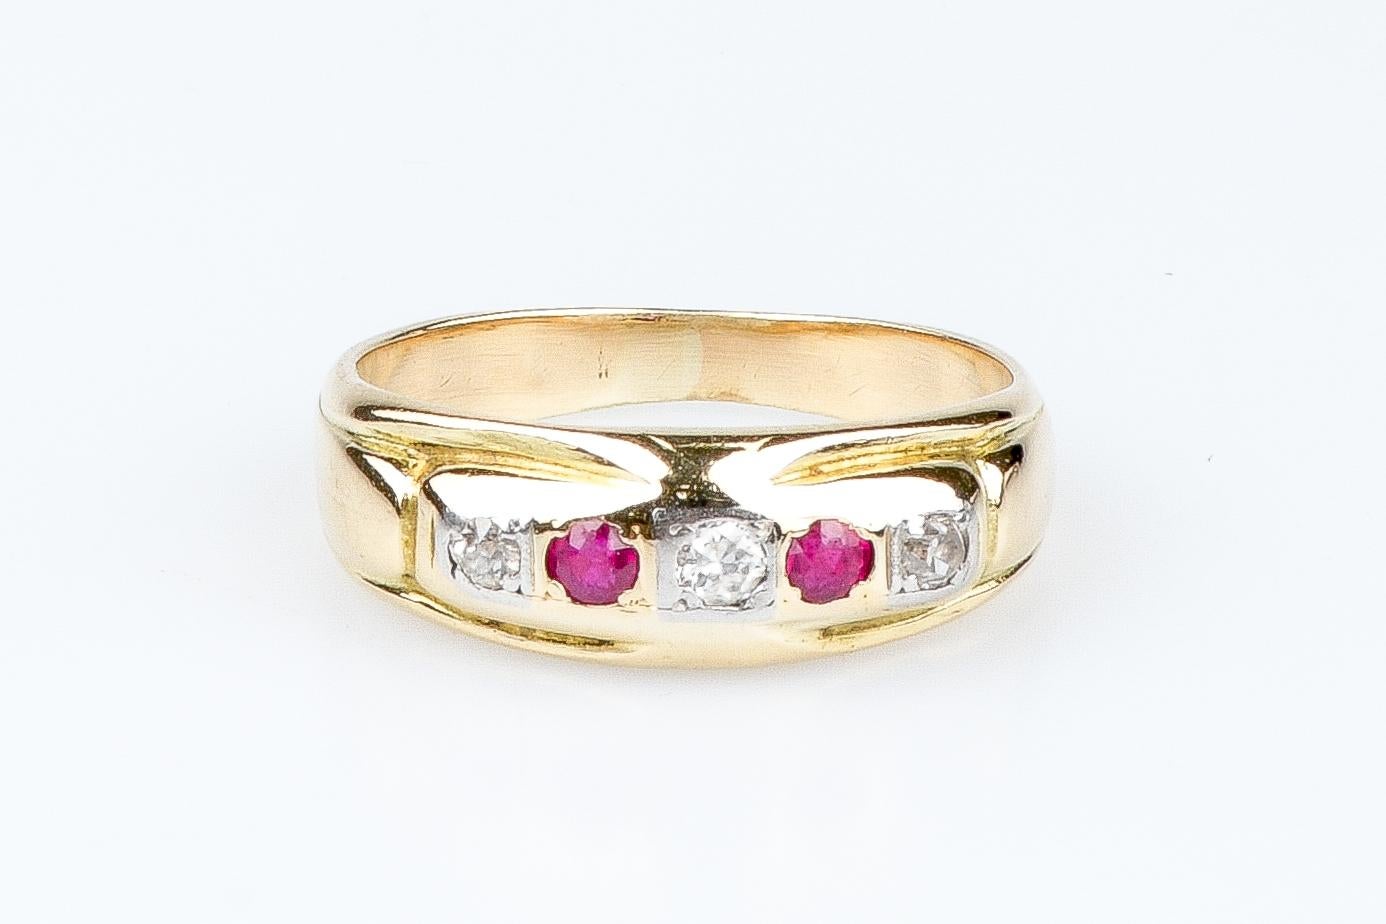 18 carat yellow gold ring designed with 2 round rubies weighing  0.06 carat, 1 round brillant cut diamond weighing 0.036 carat and 2 round brillant cut diamonds weighing 0.03 carat.

Quality of the diamond:
Color : H
Clarity : SI

 Weight : 3.70 gr.